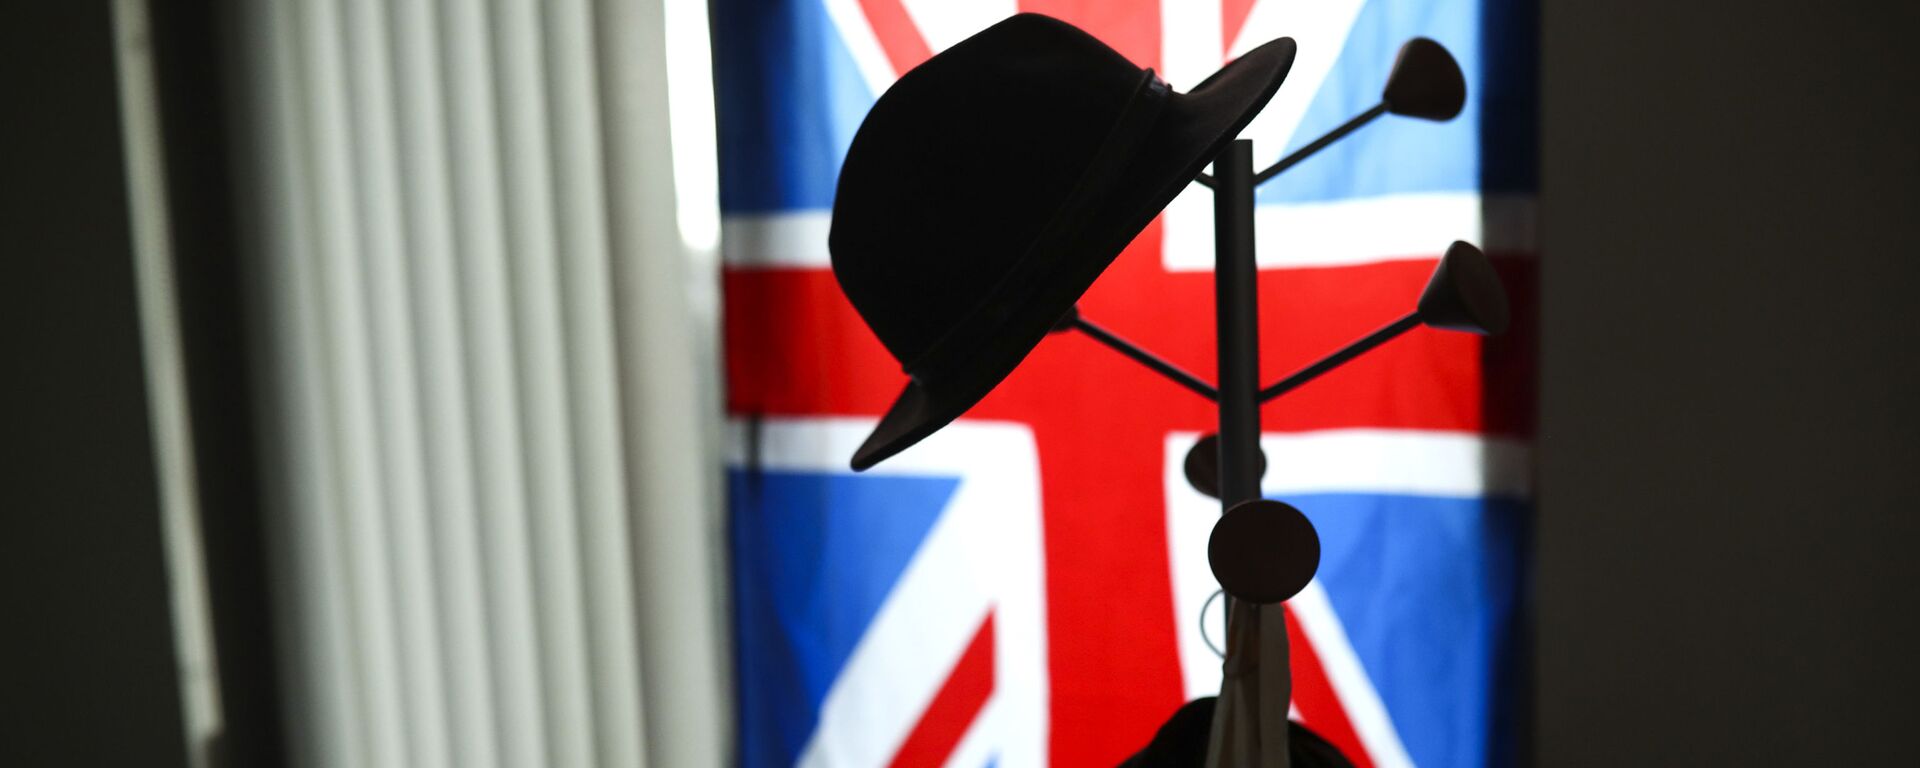 A hat hangs on a coat stand in front of the Union flag (File) - Sputnik International, 1920, 20.05.2021